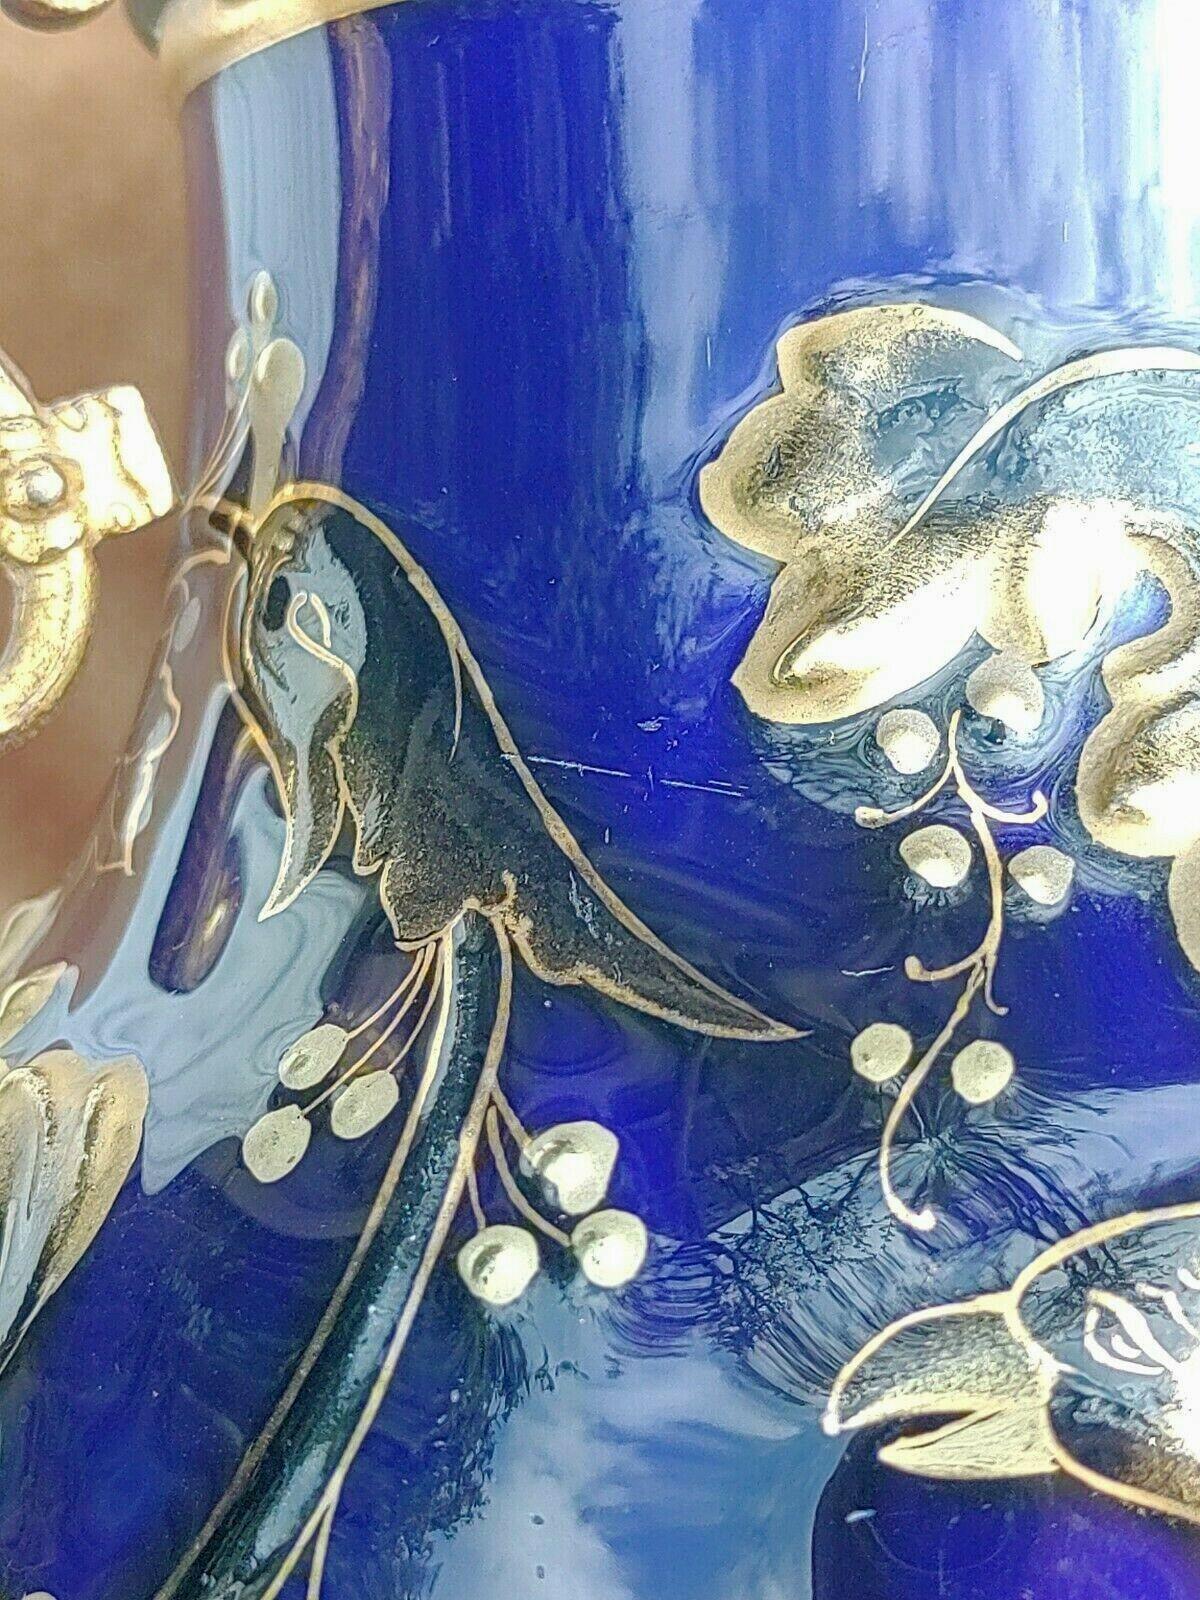 19th Century French Cobalt & Bronze Ormolu Mounted Ceramic Griffin Vase - Tommy's Treasure